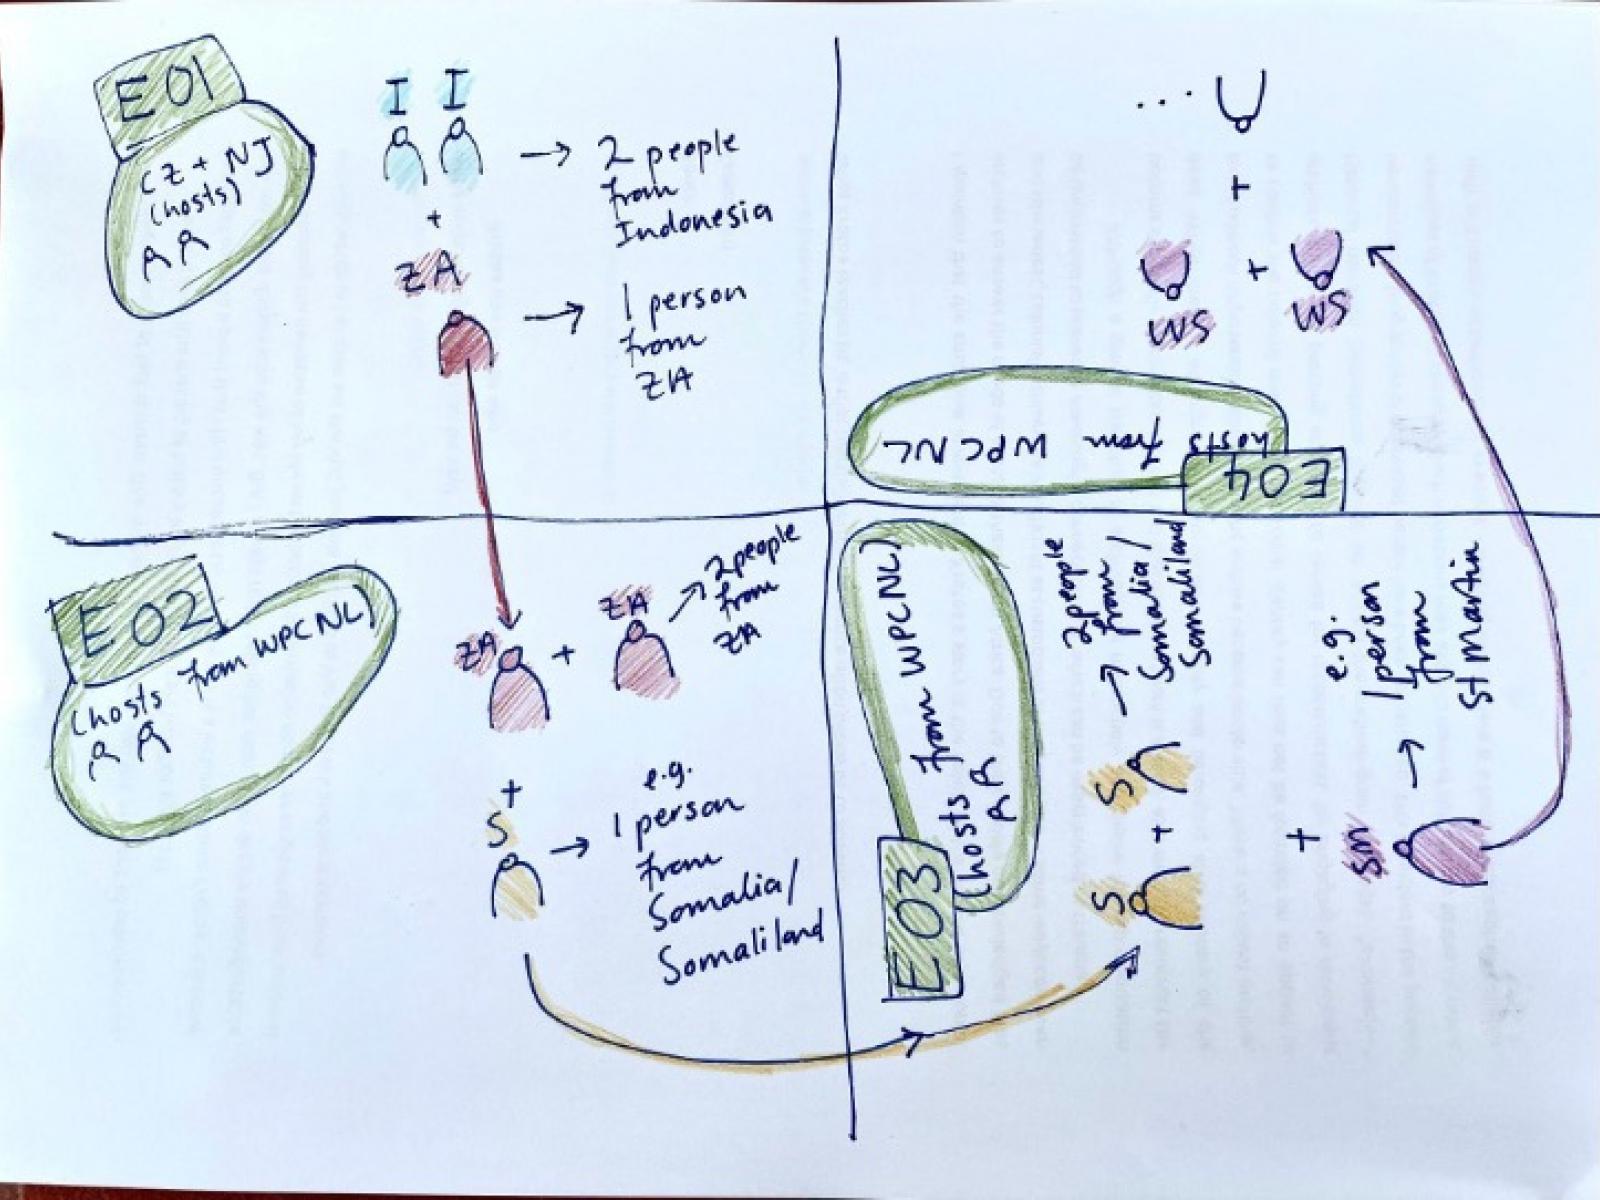 Sketch of the blind date conversation drawn by Carine Zaayman. The page is divided into quadrants with small figures representing the participants. Arrows connect the participants across quadrants. Each quadrant is labelled E01-E04.